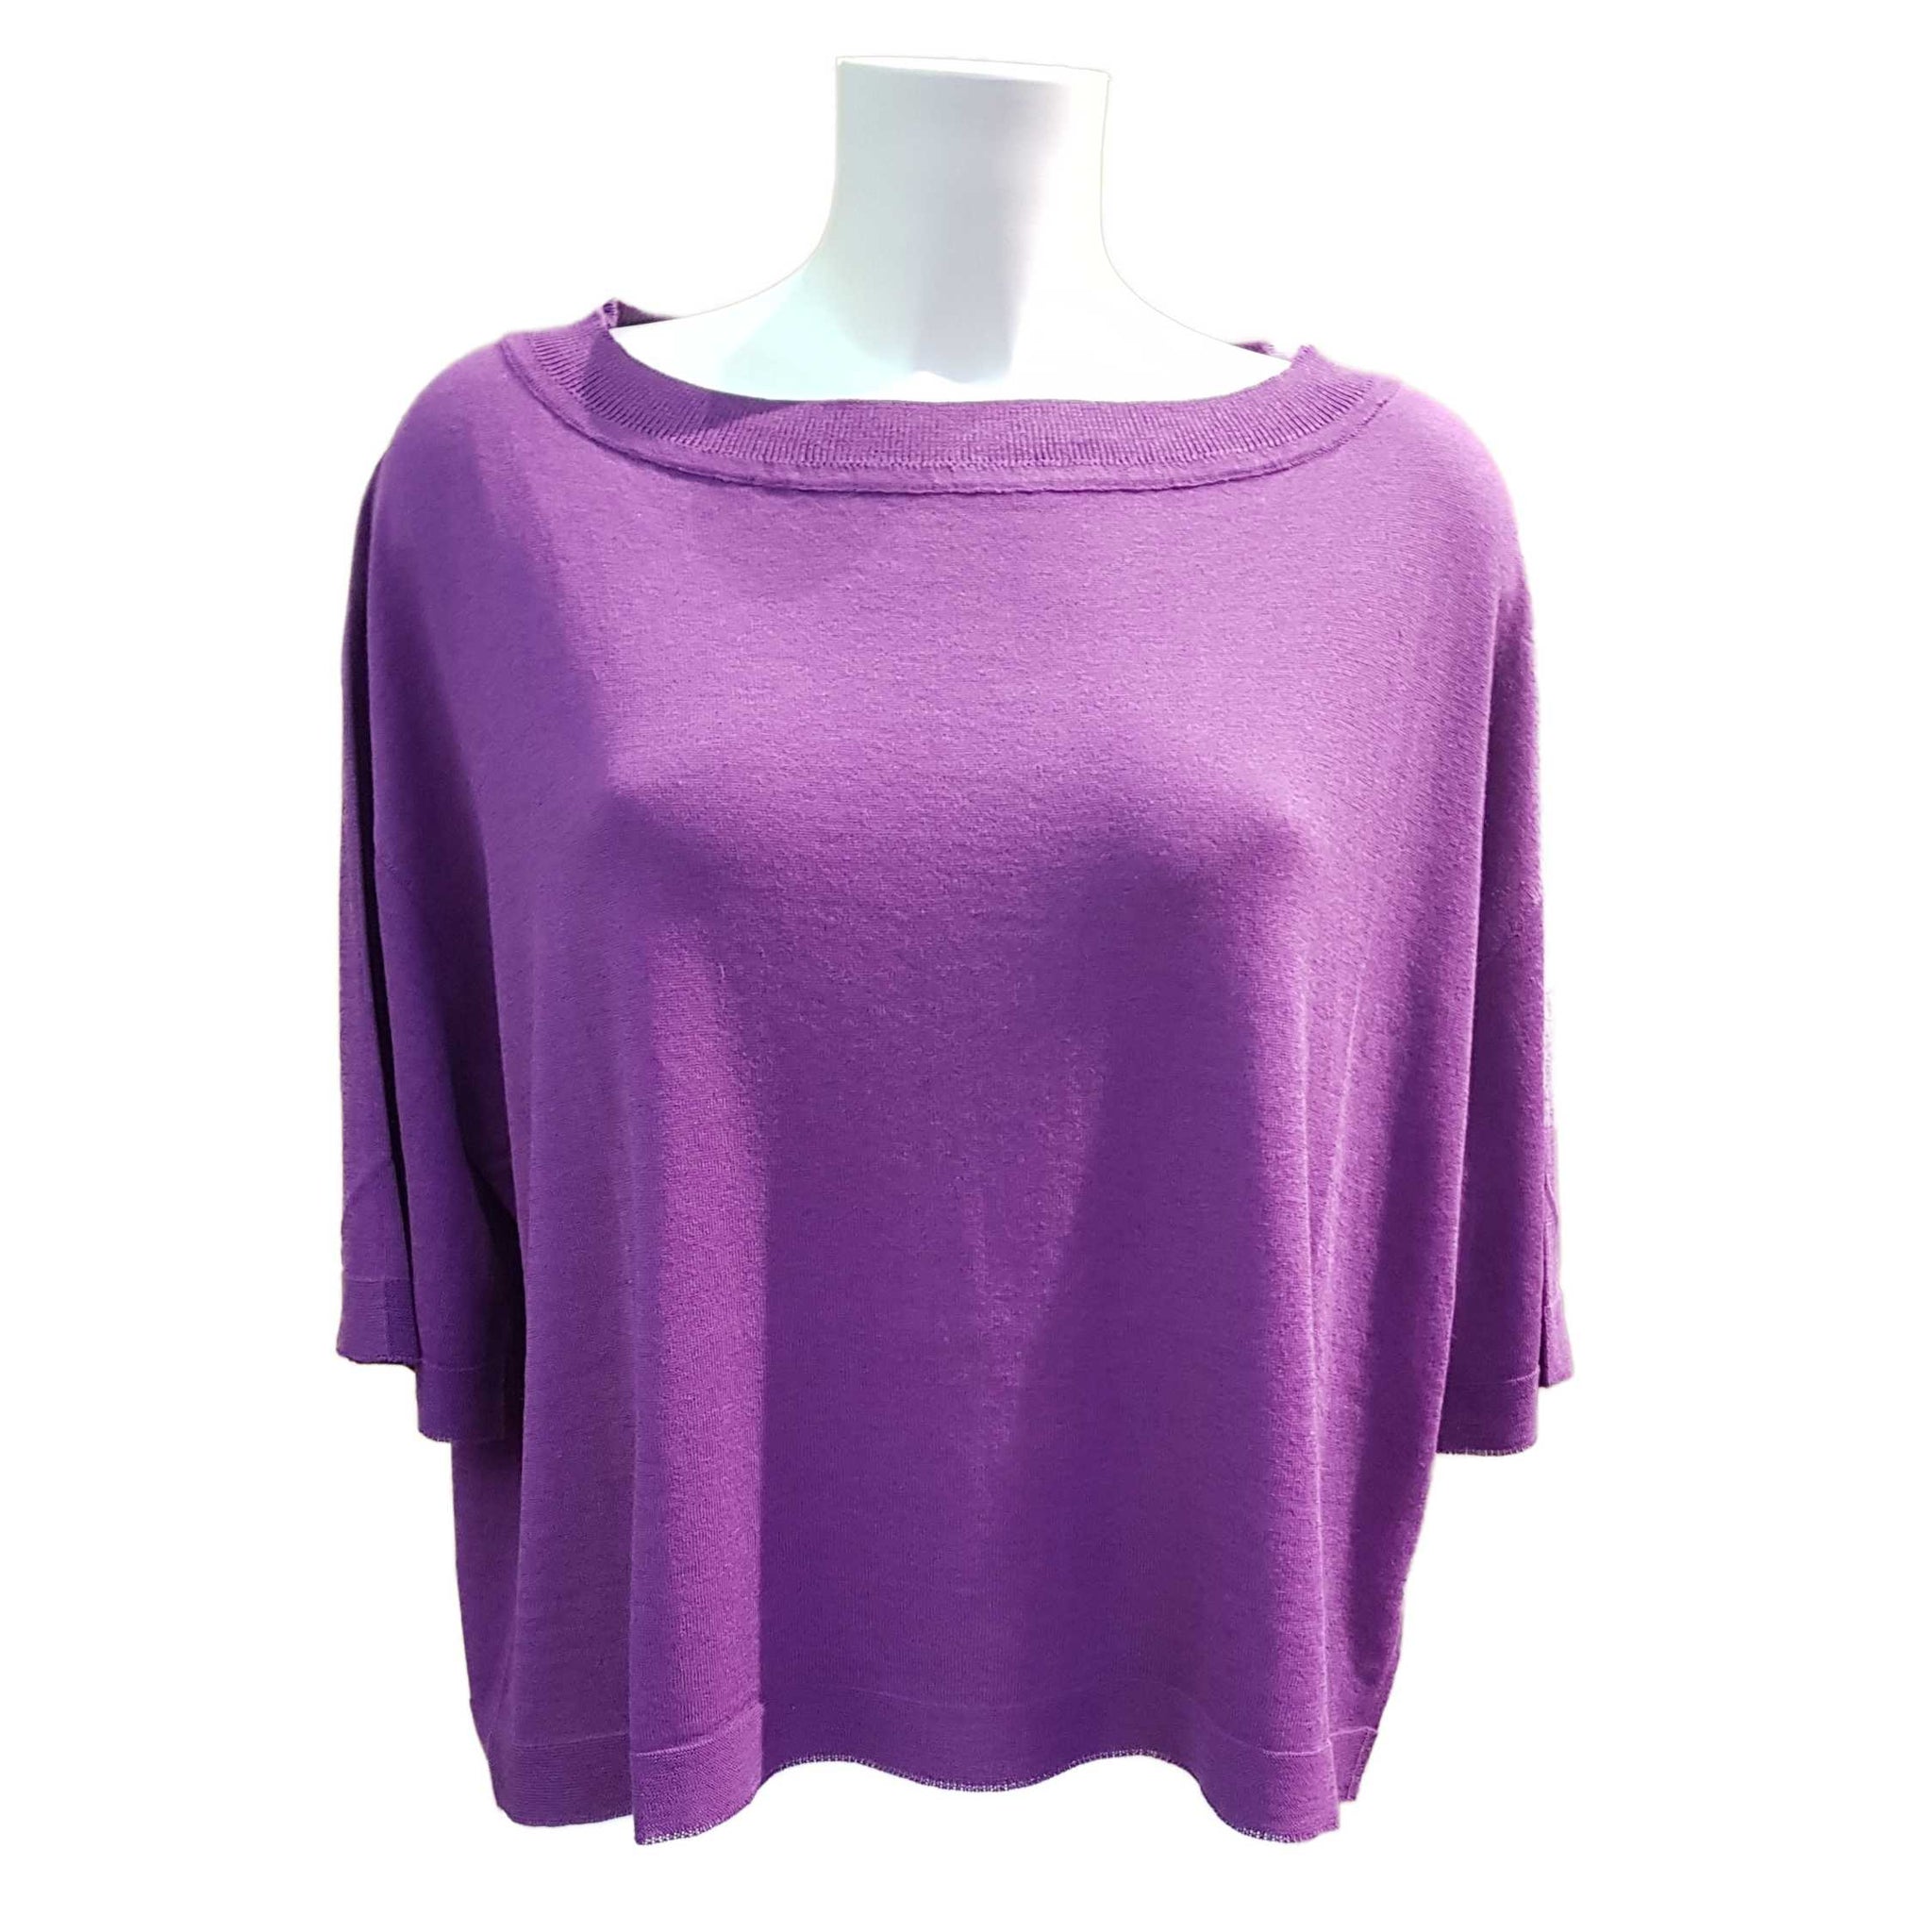 Tabaroni Cashmere, leichter Pullover in Lila